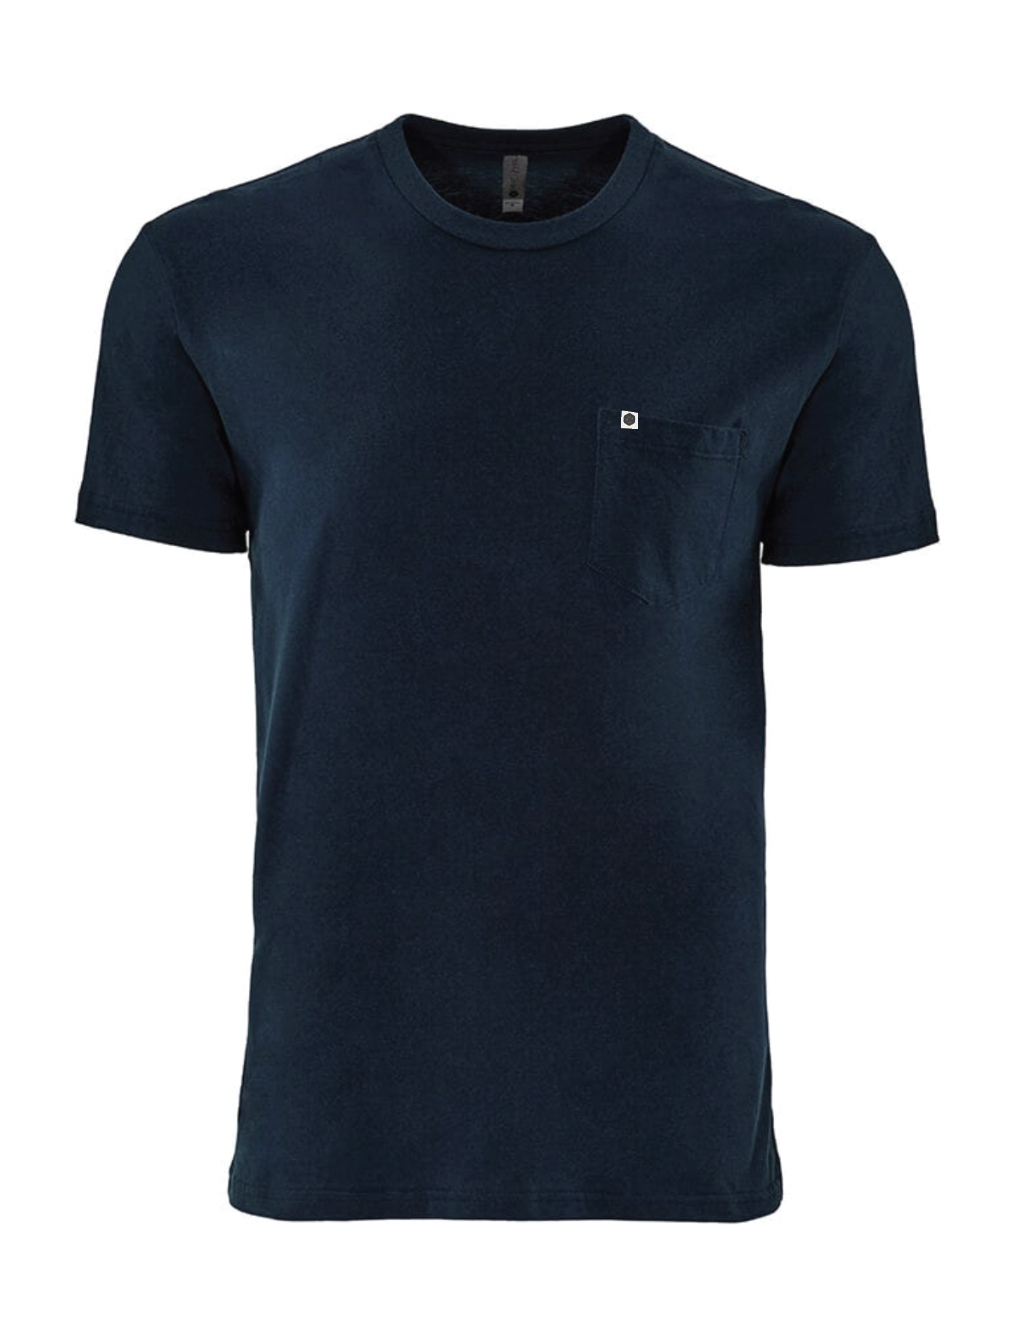 In The Know Unisex Pocket Tee in Navy